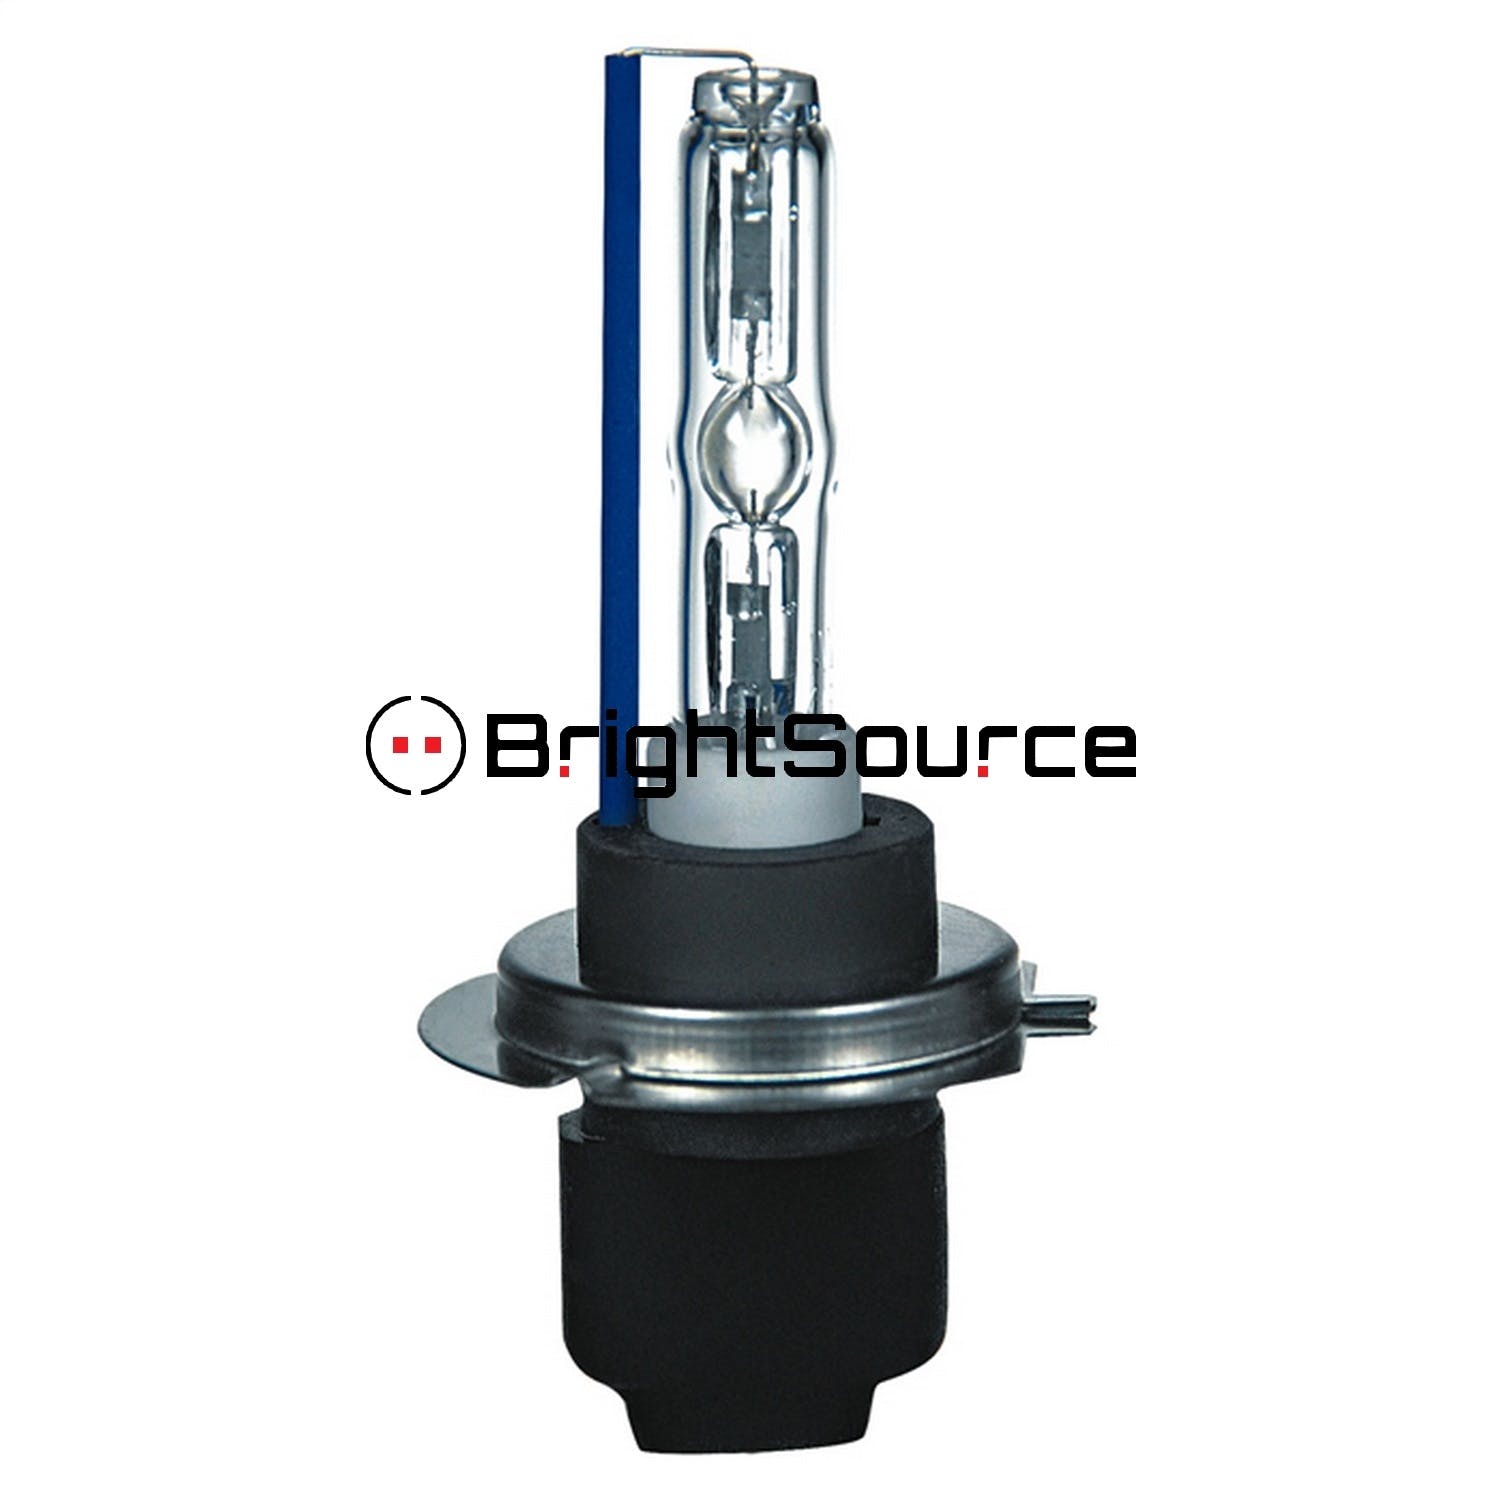 BrightSource 39997 HID Kit